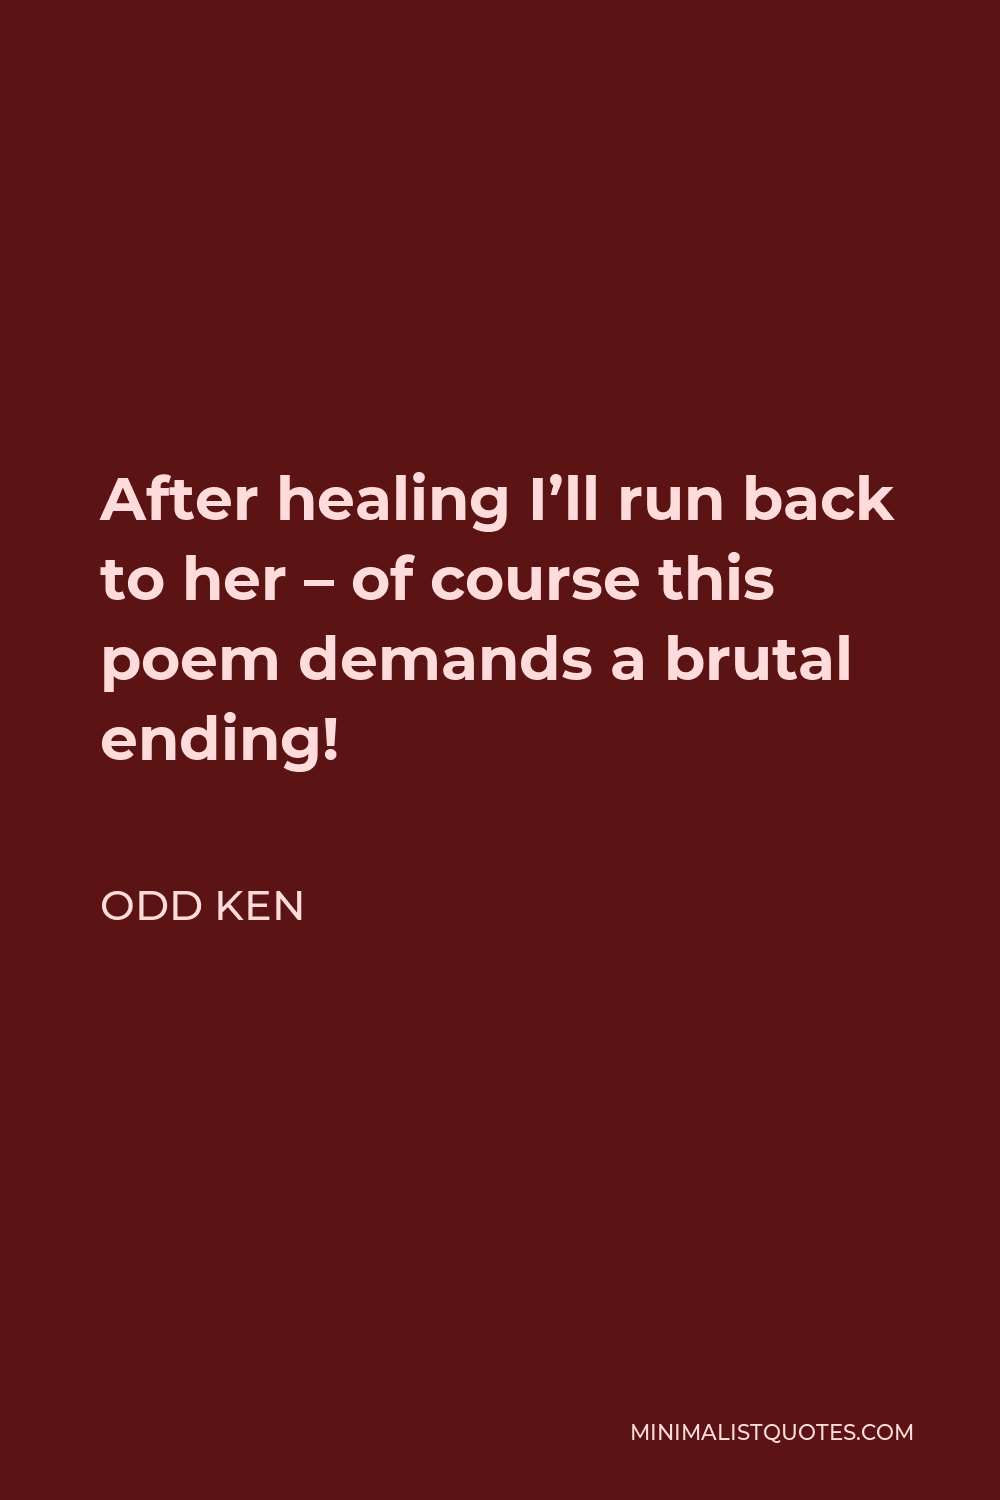 Odd Ken Quote - After healing I’ll run back to her – of course this poem demands a brutal ending!